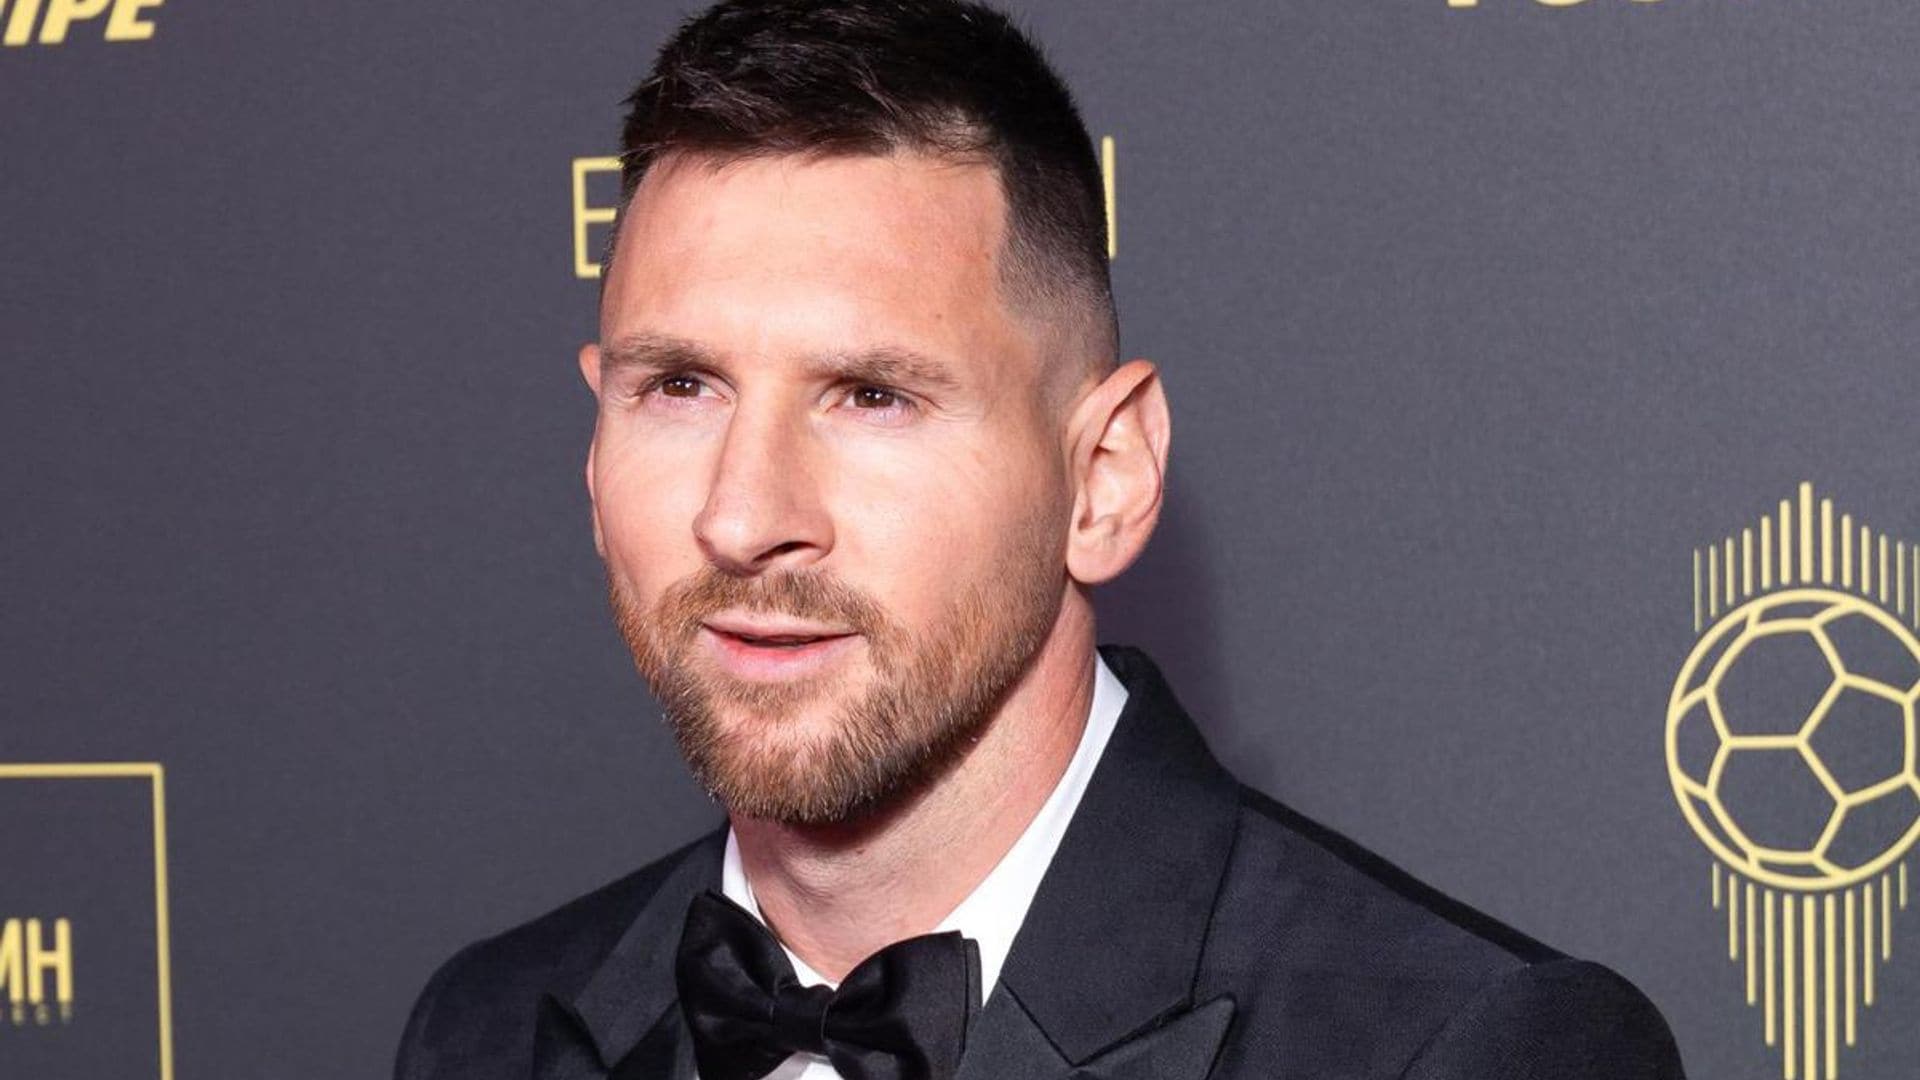 Lionel Messi secures coveted Super Bowl ad that could cost $14 million